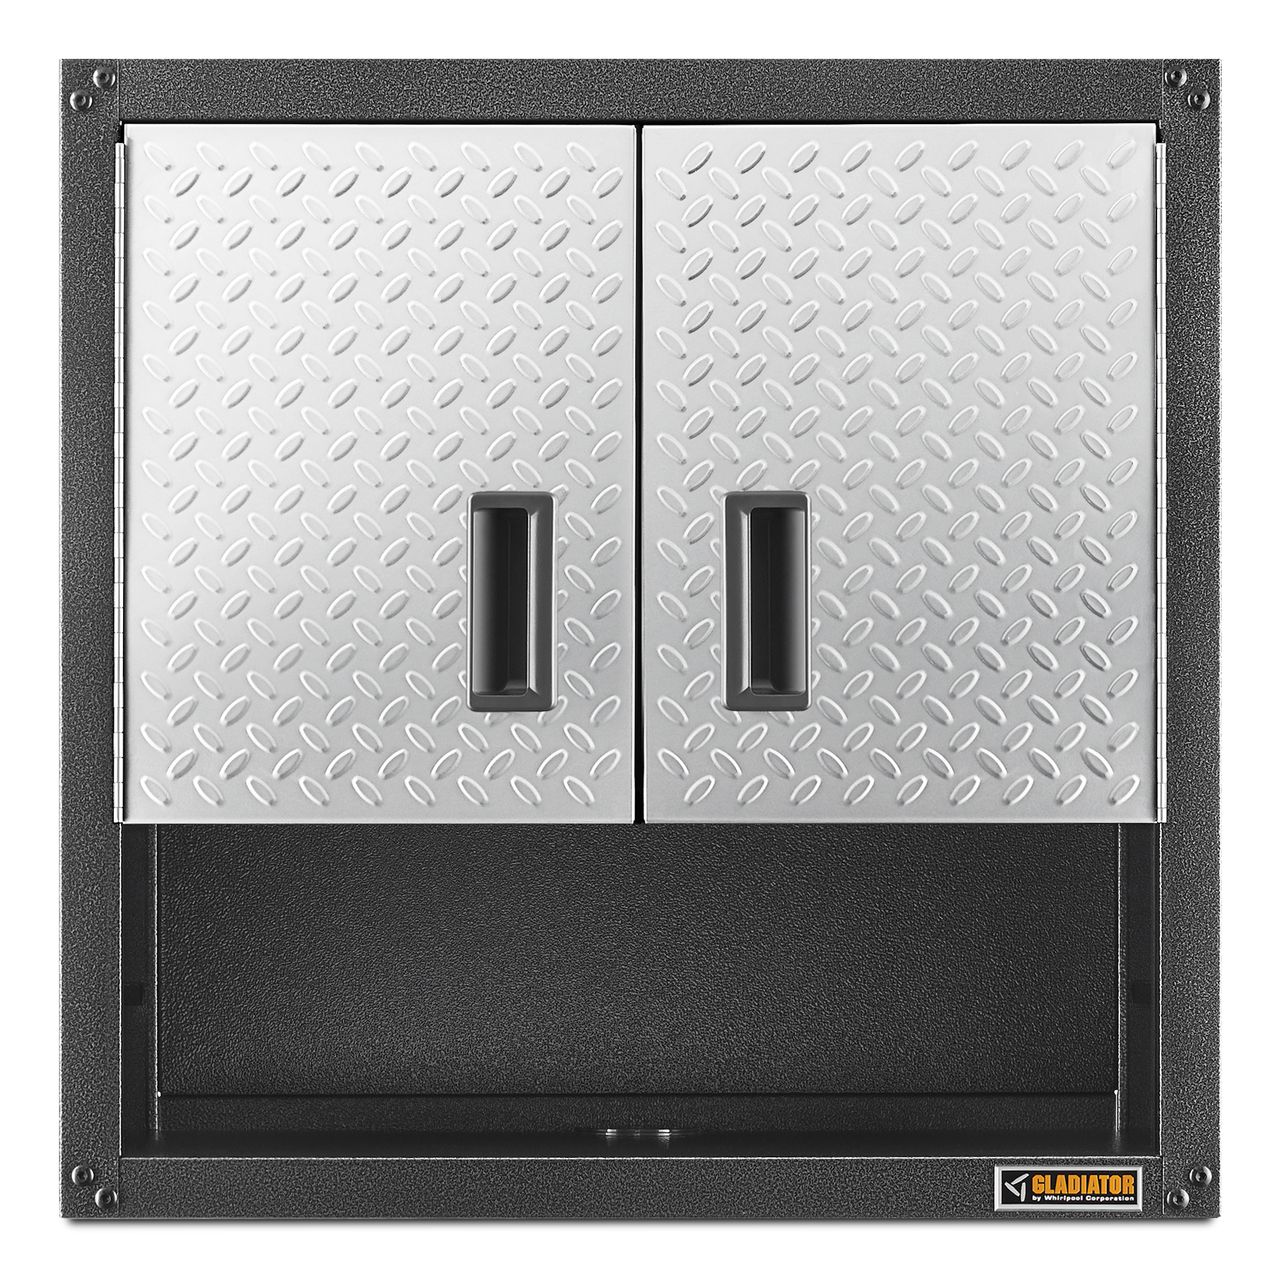 Gladiator Ready-to-Assemble 3/4 Door Wall GearBox Steel Wall-mounted Garage Cabinet (Gray) $90 at Lowe's w/ Free Curbside Pickup